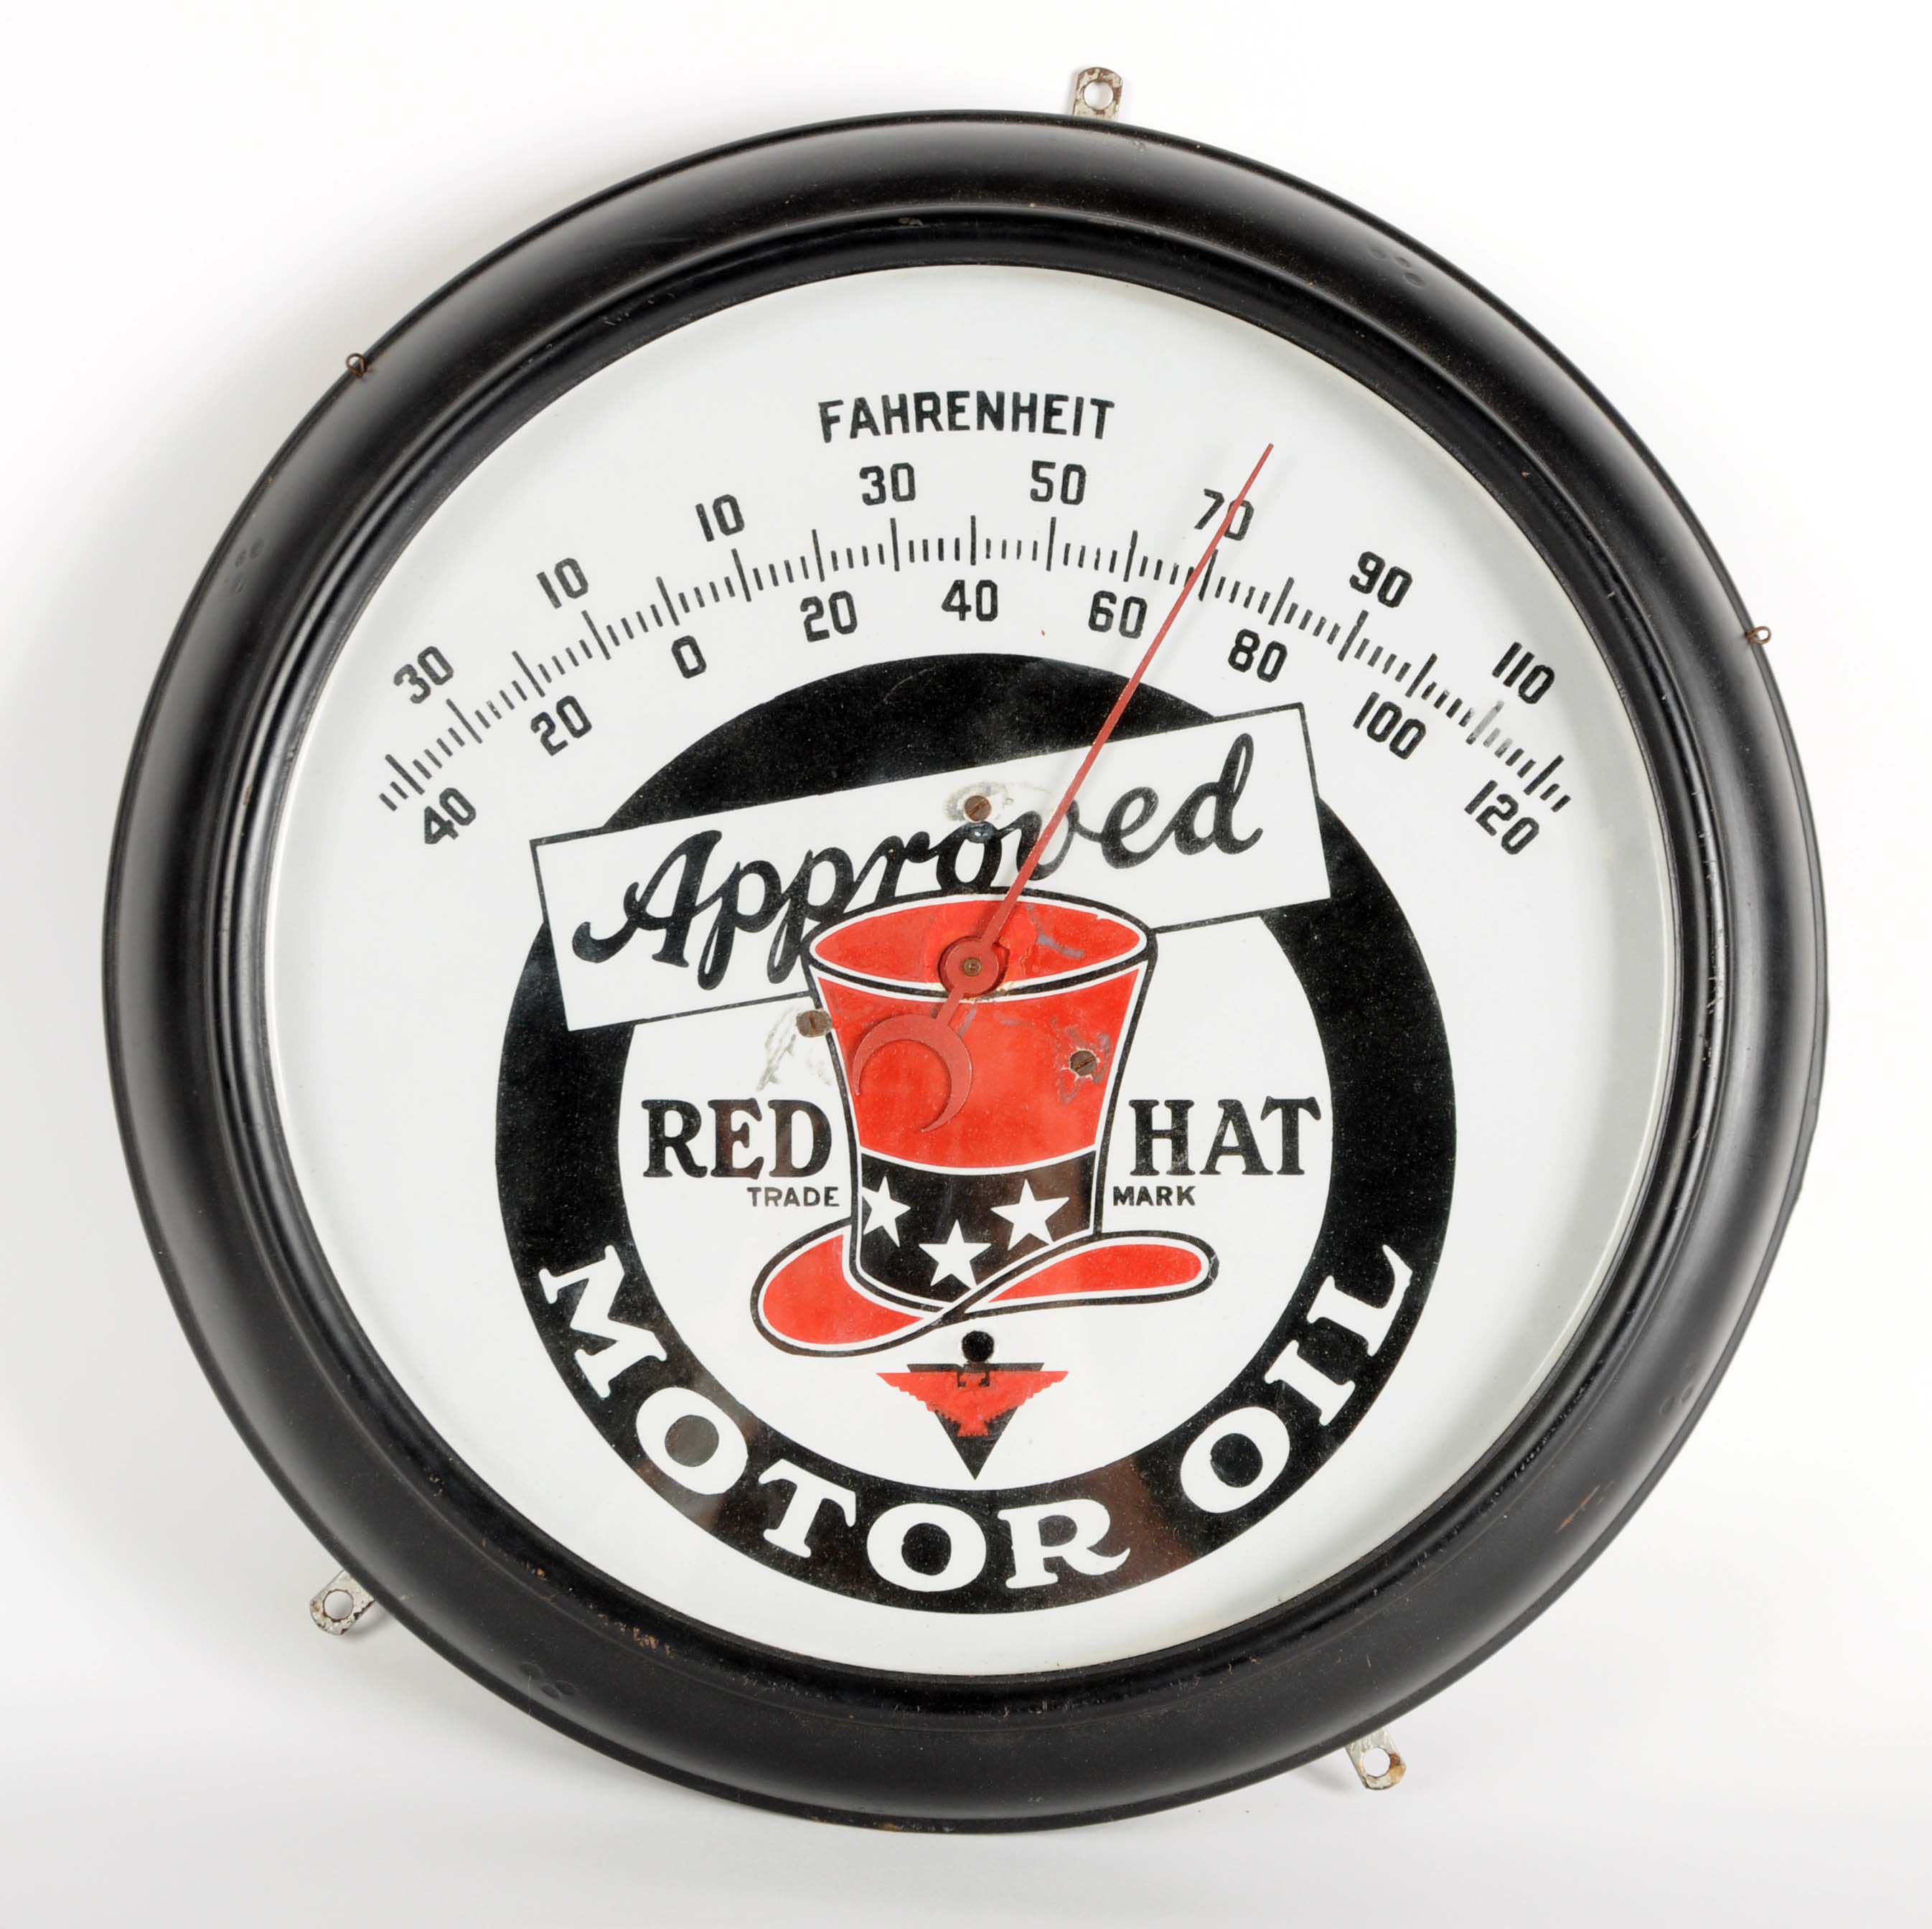 Lot #46, Red Hat Porcelain Thermometer, estimated at $4,000-$6,000.